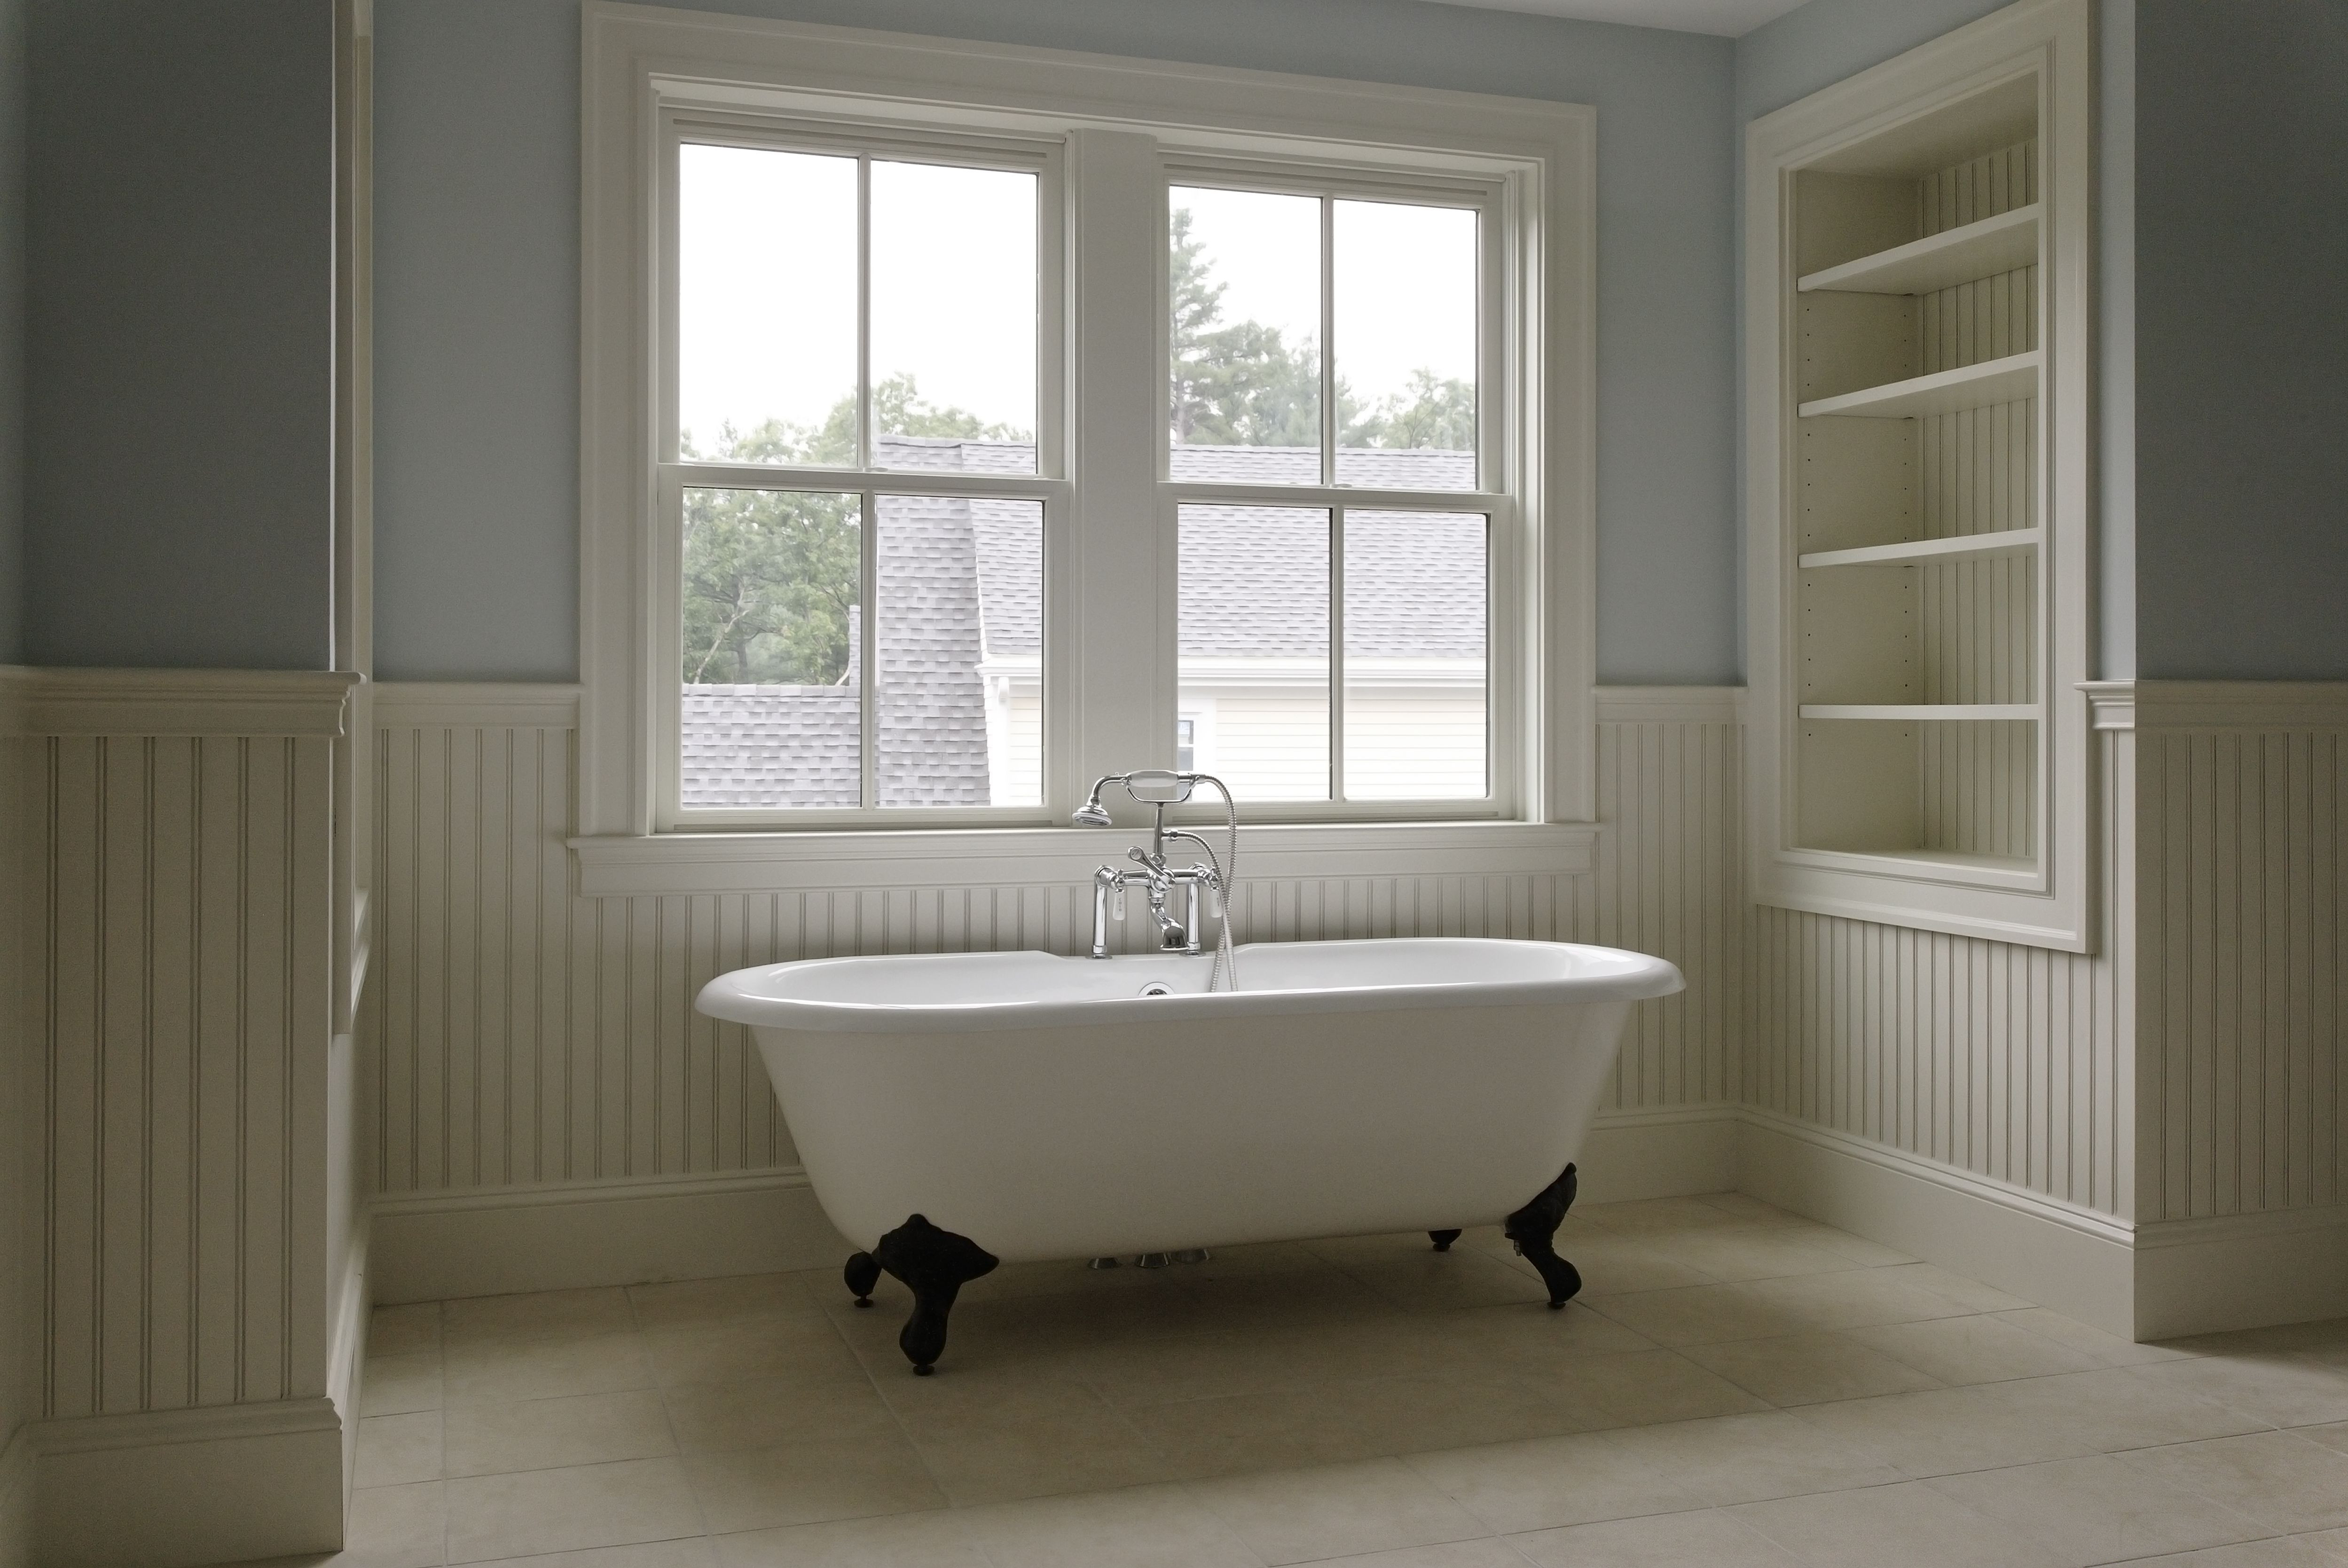 19 attractive Cost to Refinish Hardwood Floors Seattle 2024 free download cost to refinish hardwood floors seattle of miracle method company profile in tradional style bathroom with clawfoot tub 133600769 582c8e5d3df78c6f6a4f5d3f